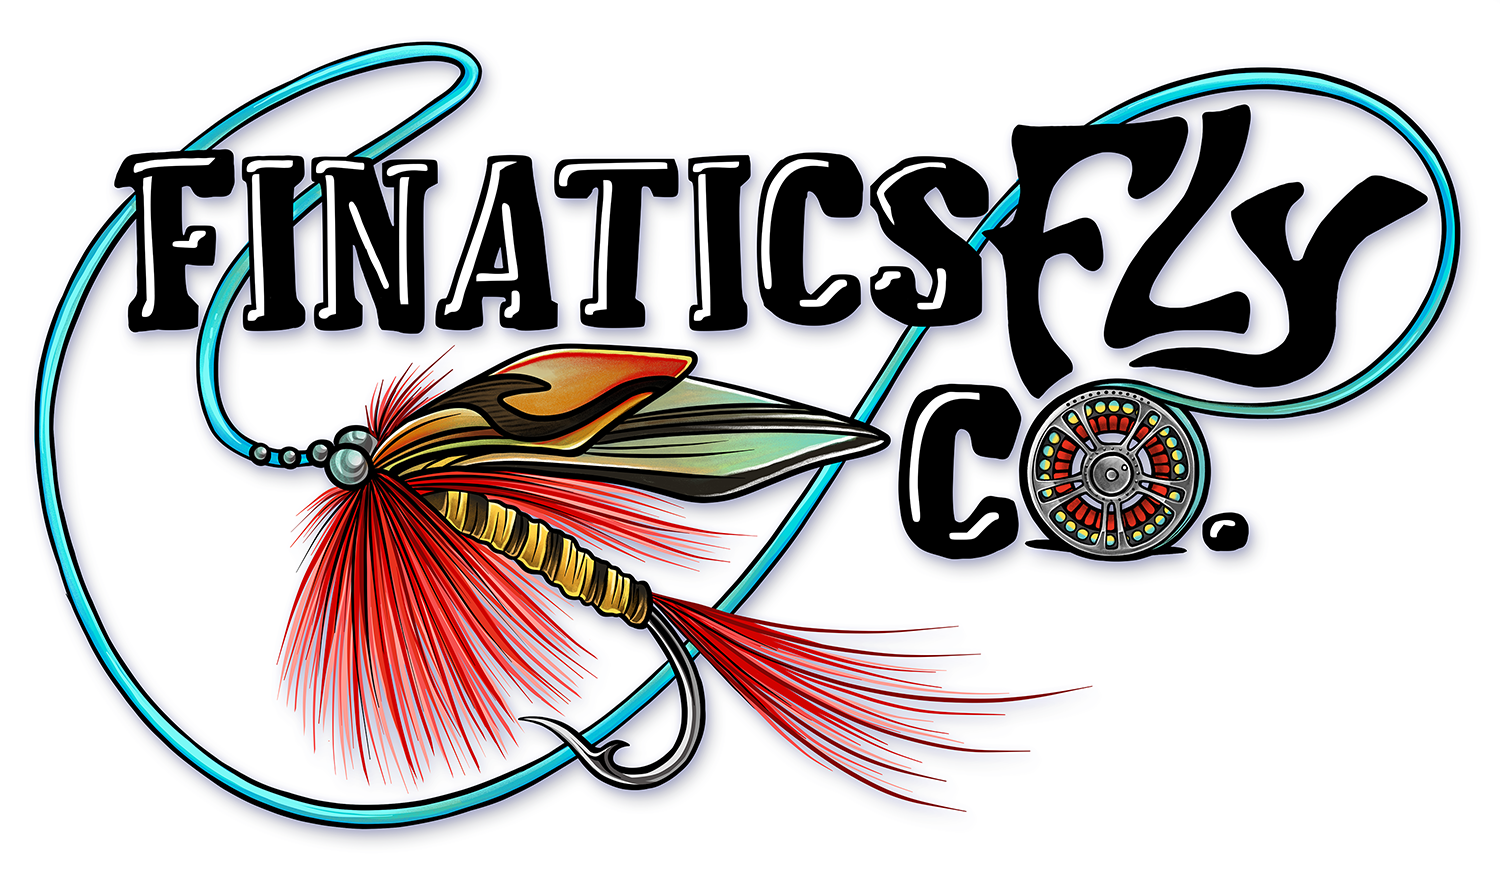 Fly Fishing Finatics Fly Co. Illustration Logo Graphic by Jessica Laine Morris